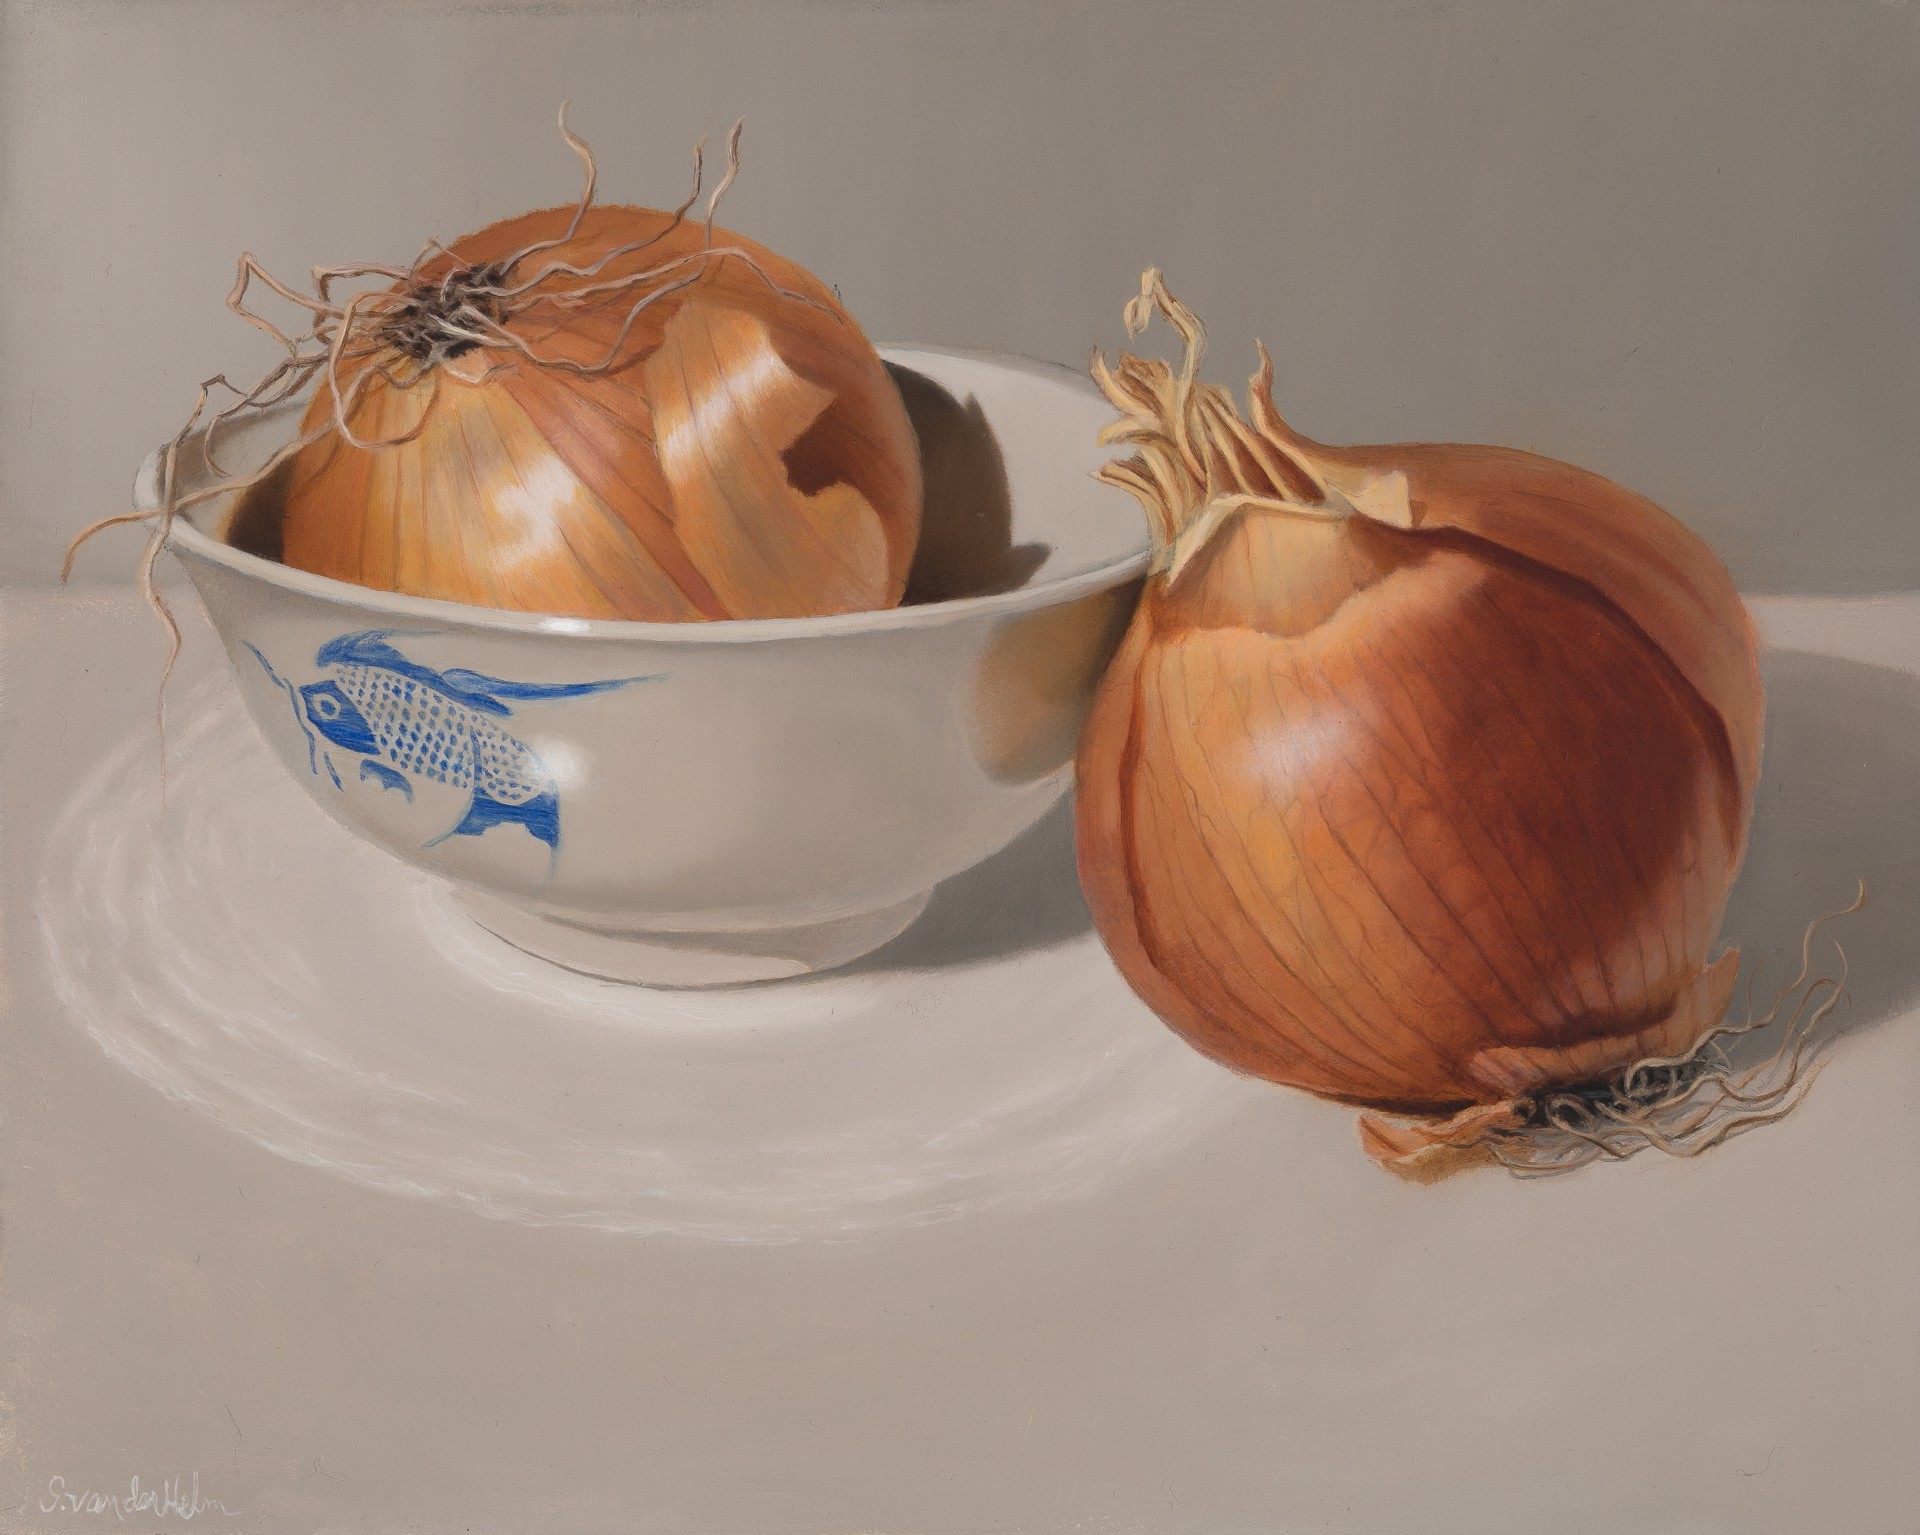 Two Yellow Onions by Sarah van der Helm